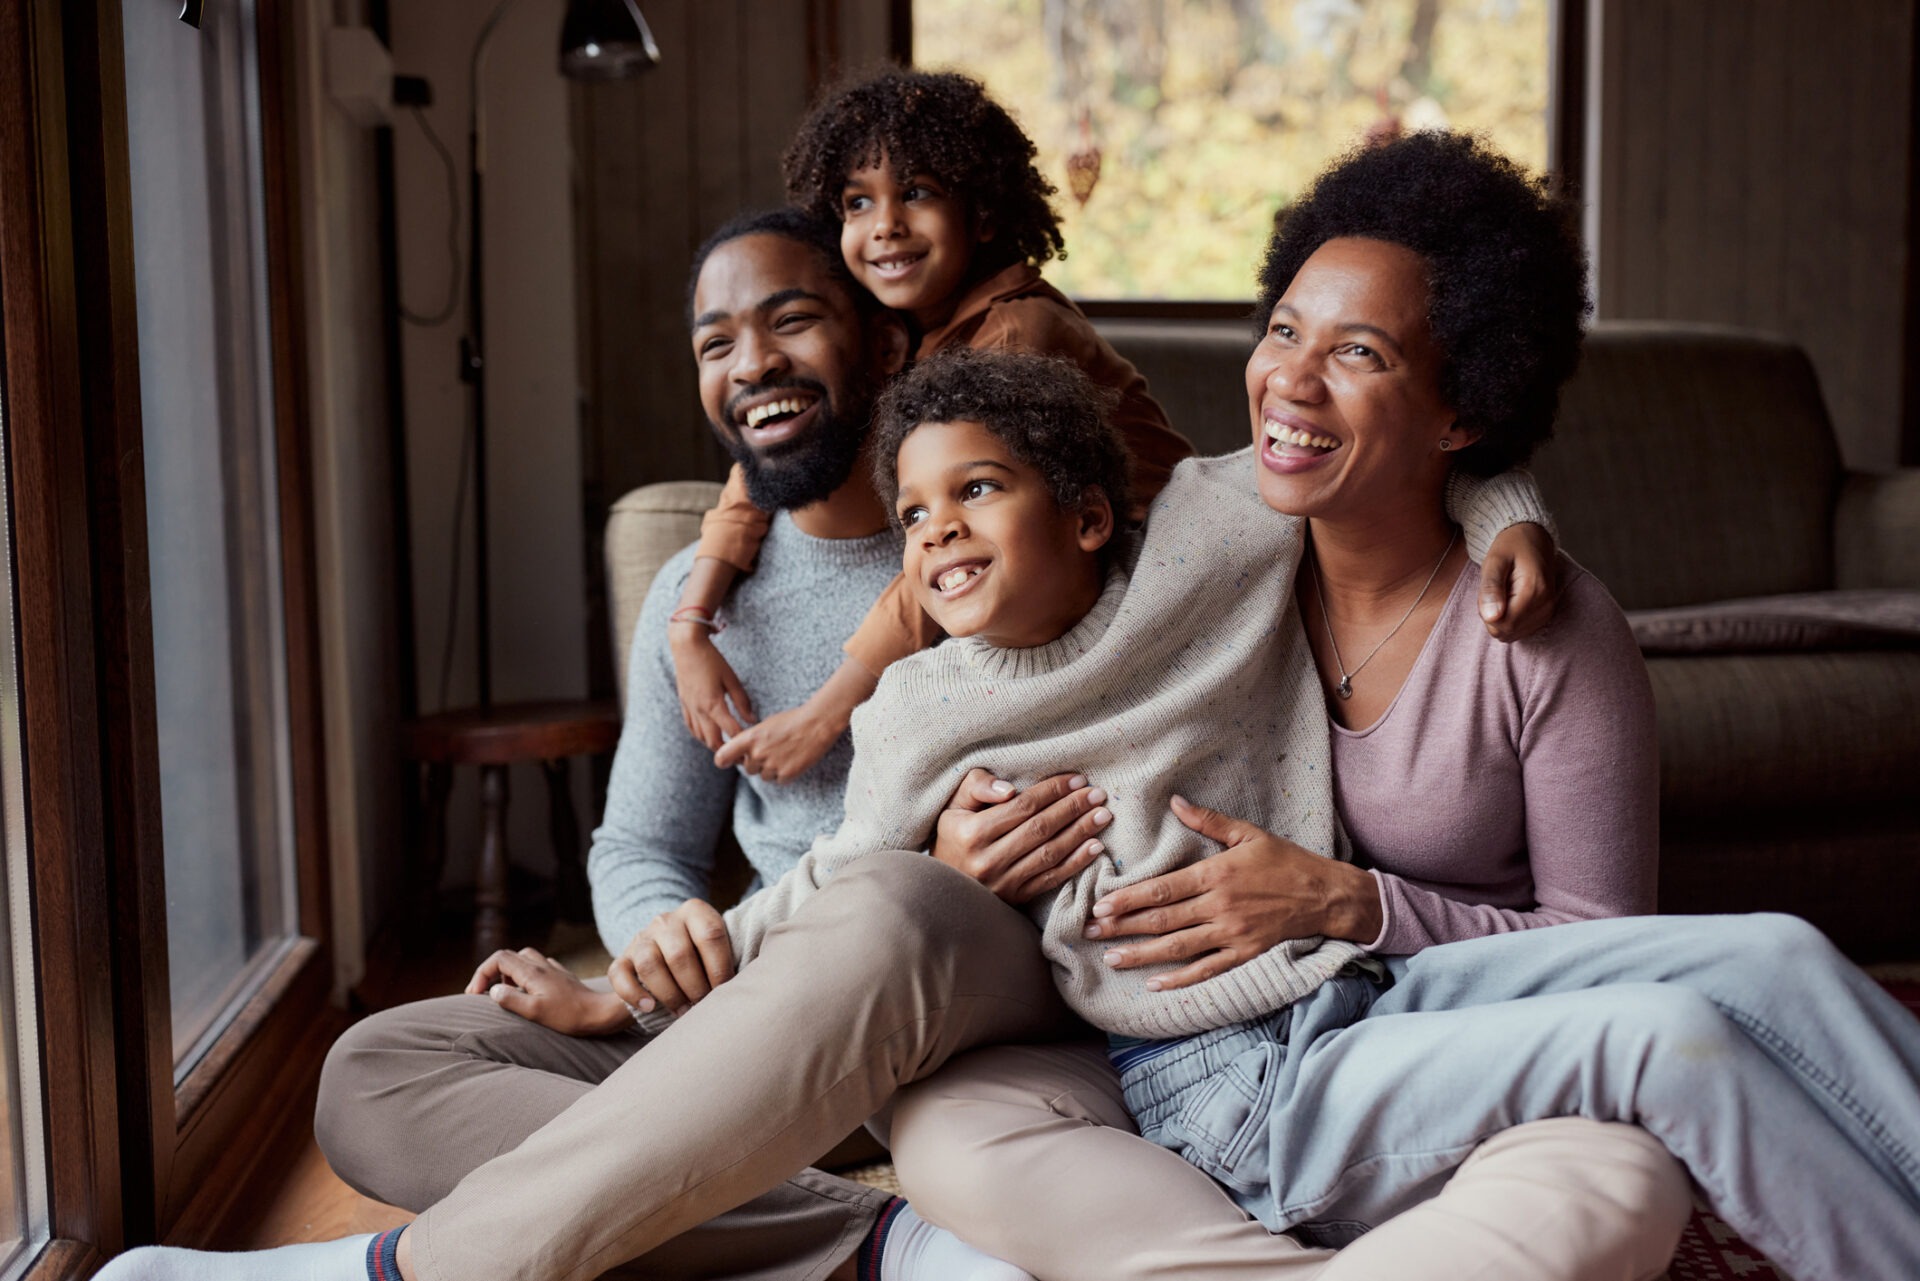 This image depicts a happy family indoors with two children. There's a person with a beard, a smiling person, and joyful kids embracing each other warmly.